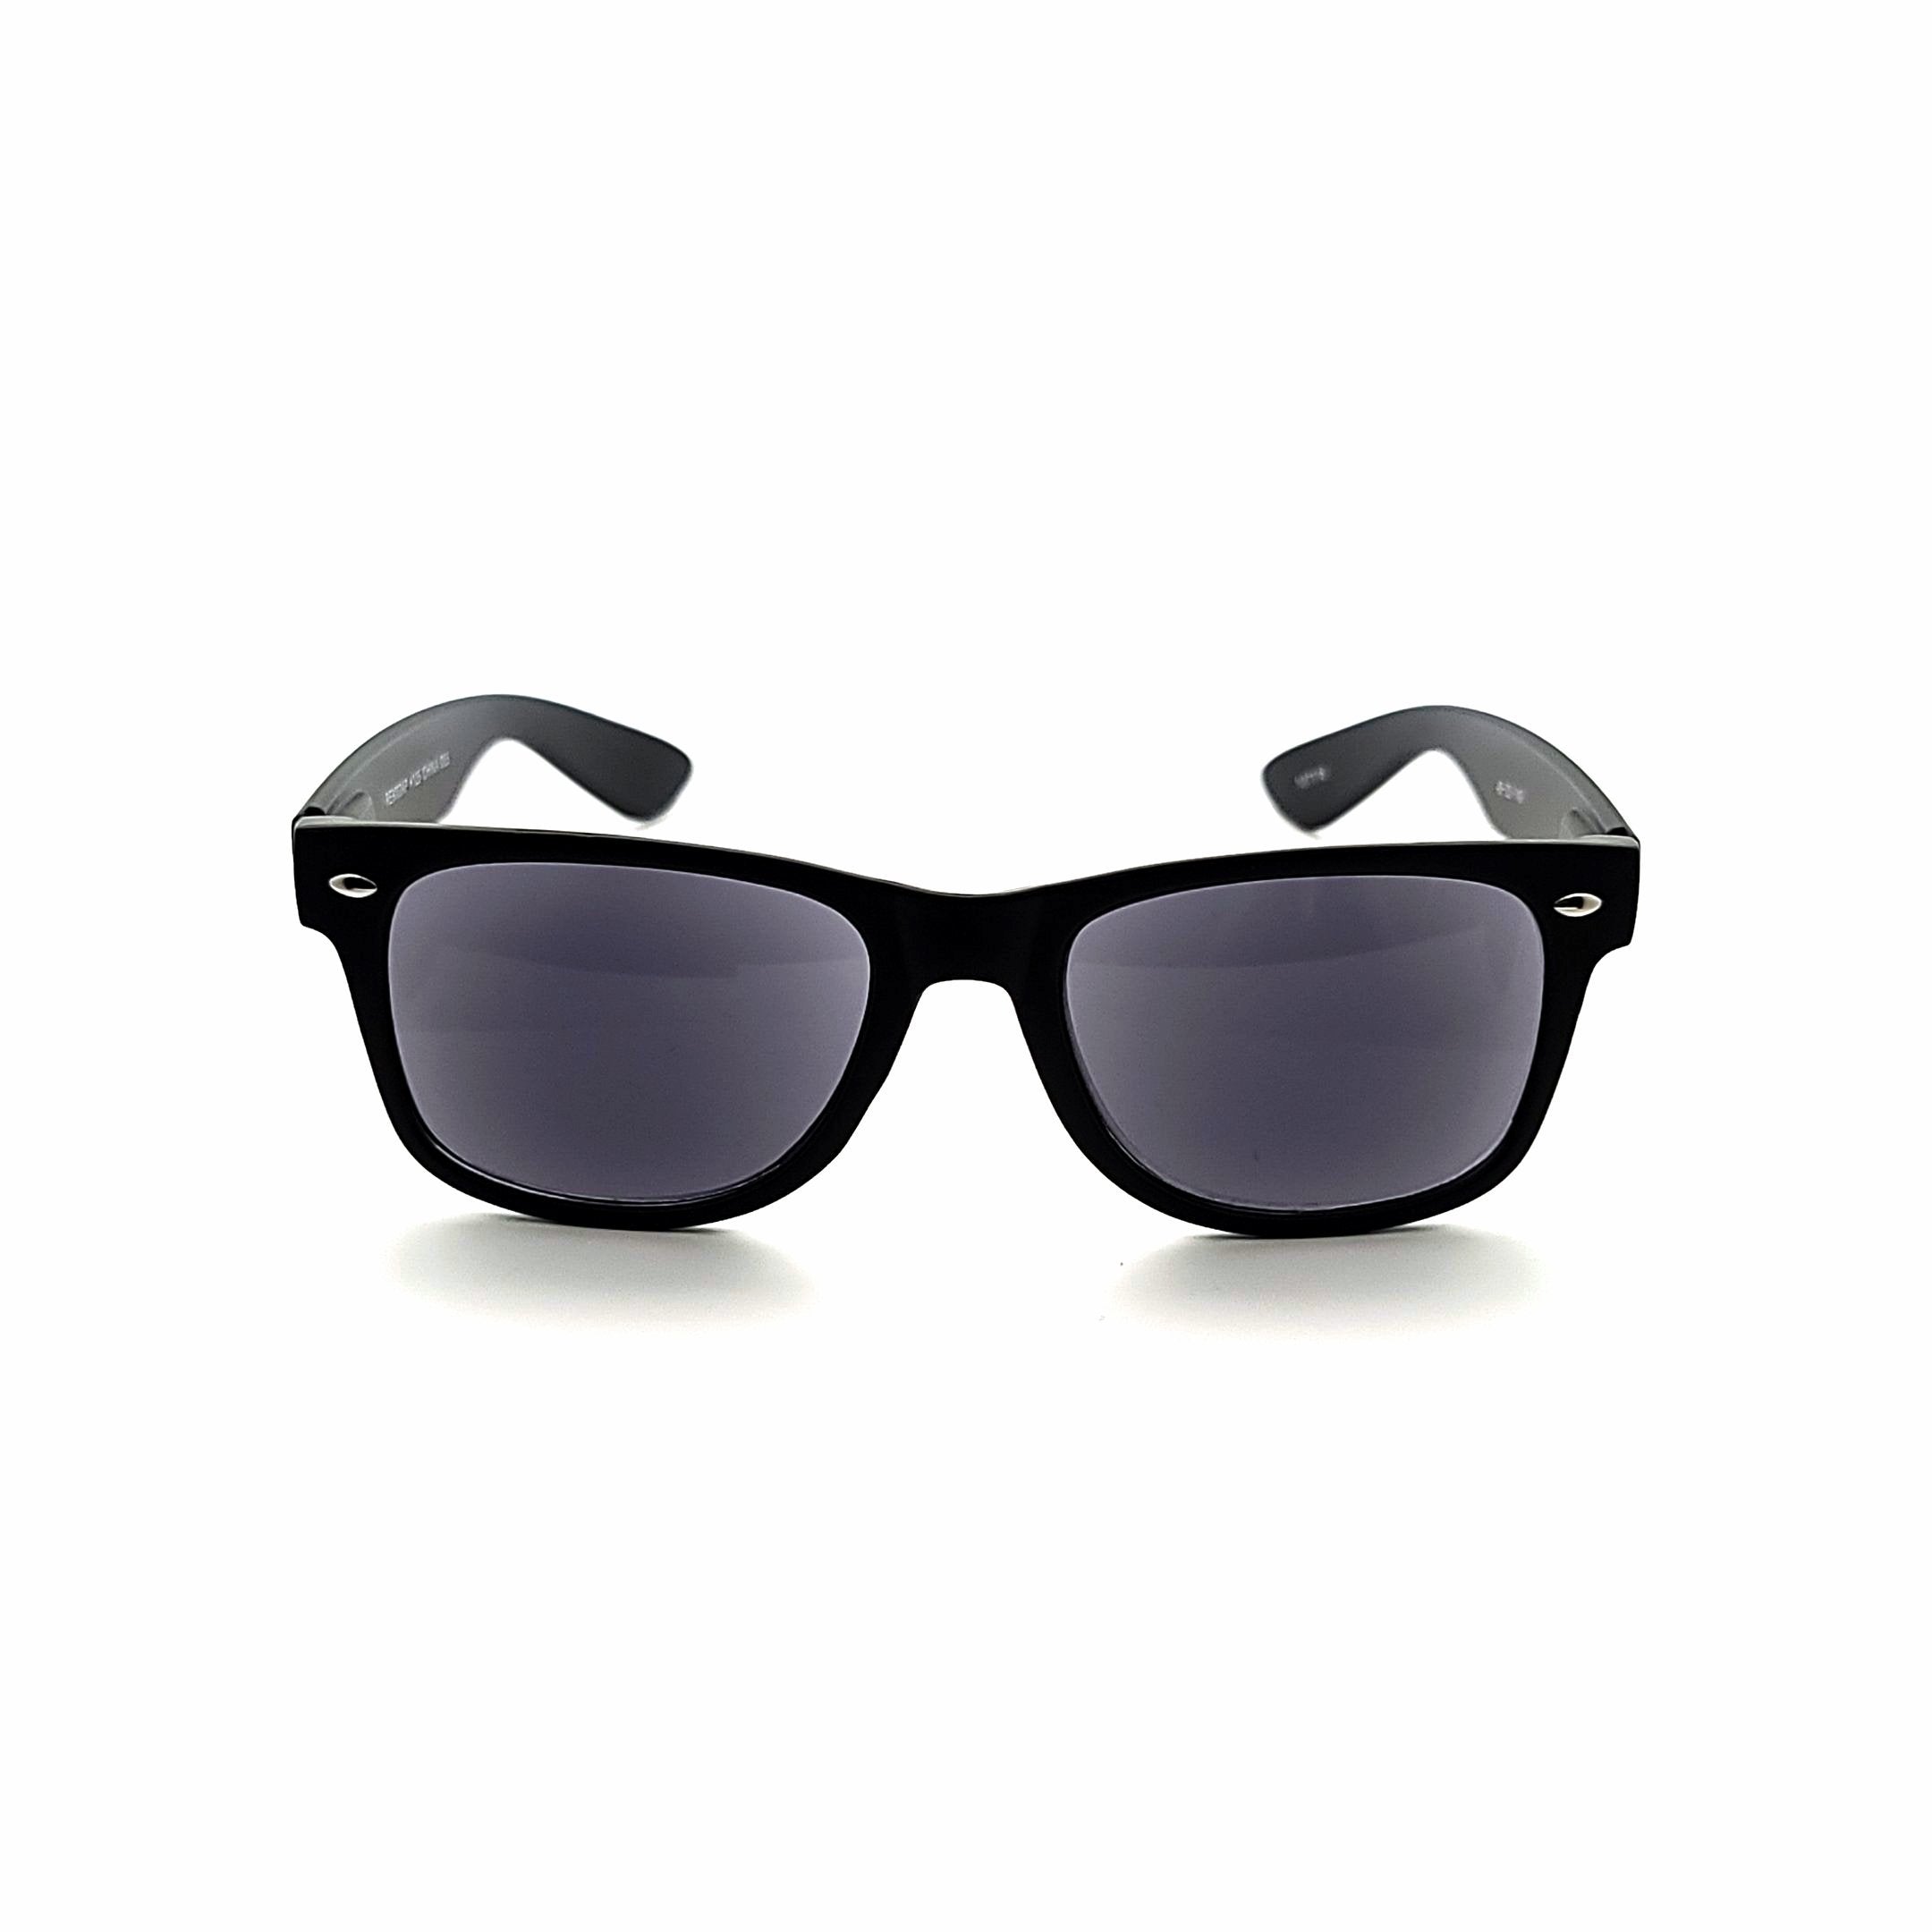 Black Horn Rimmed Sunglasses For Women Isolated On White Stock Photo -  Download Image Now - iStock